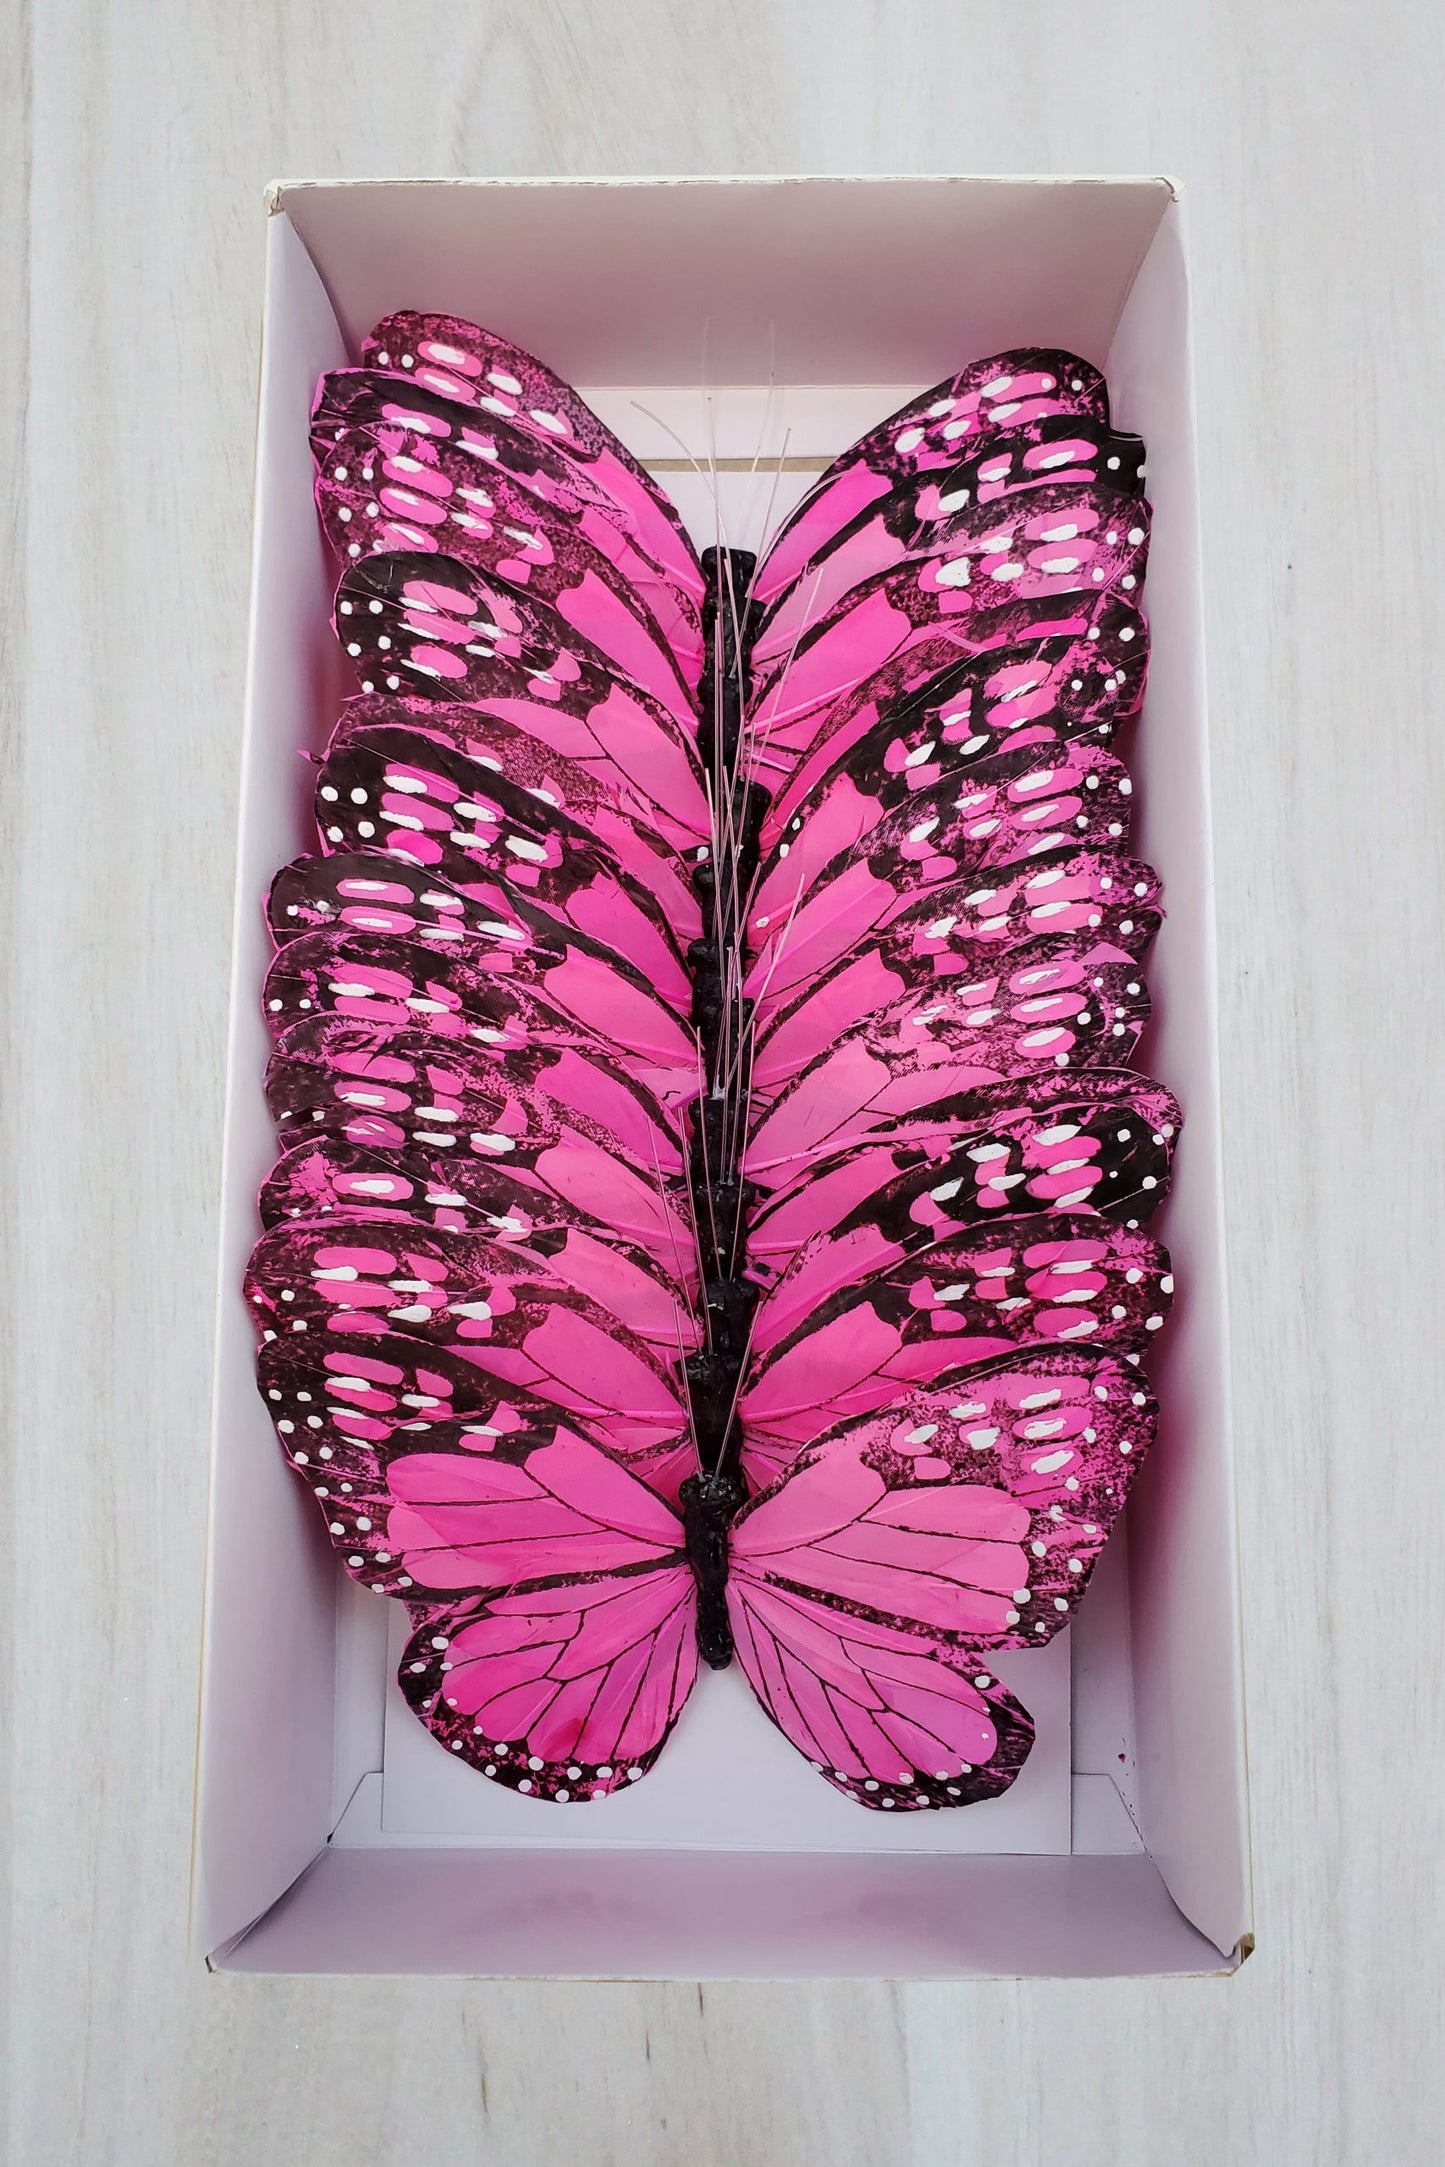 7 inch pink and black monarch buttery - 1 dz per box